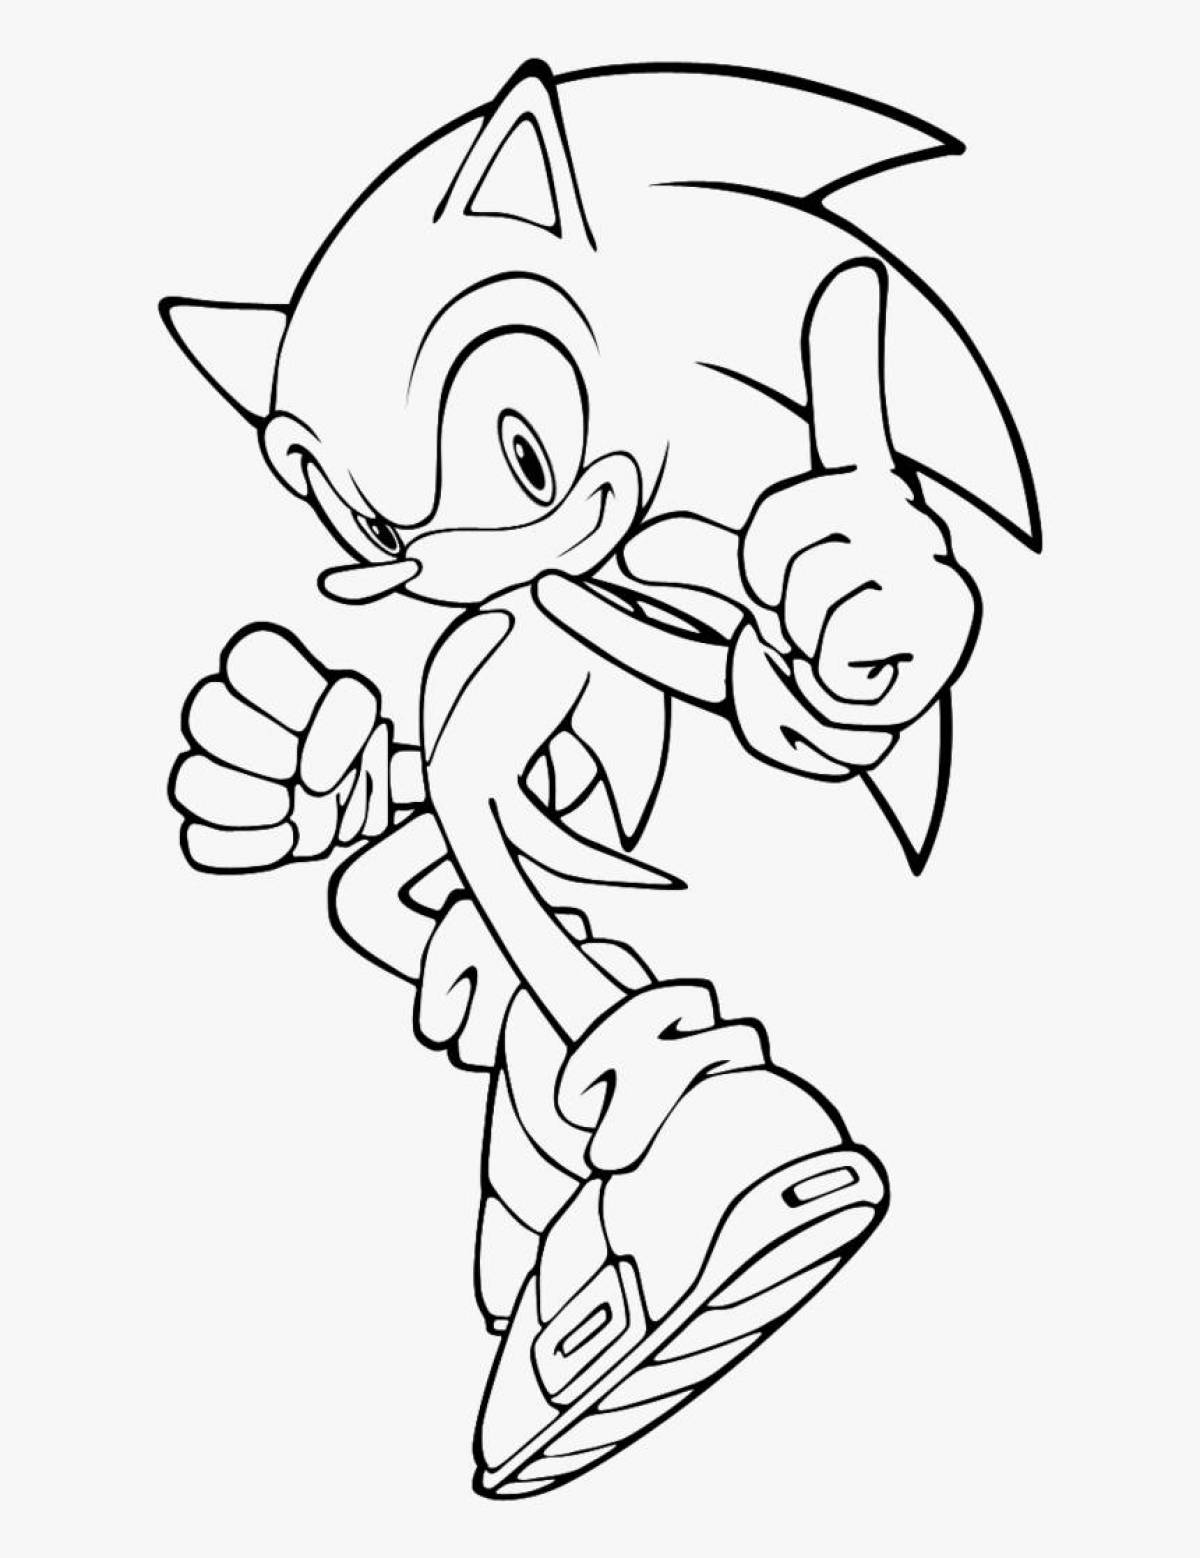 Adorable sonic coloring book for kids